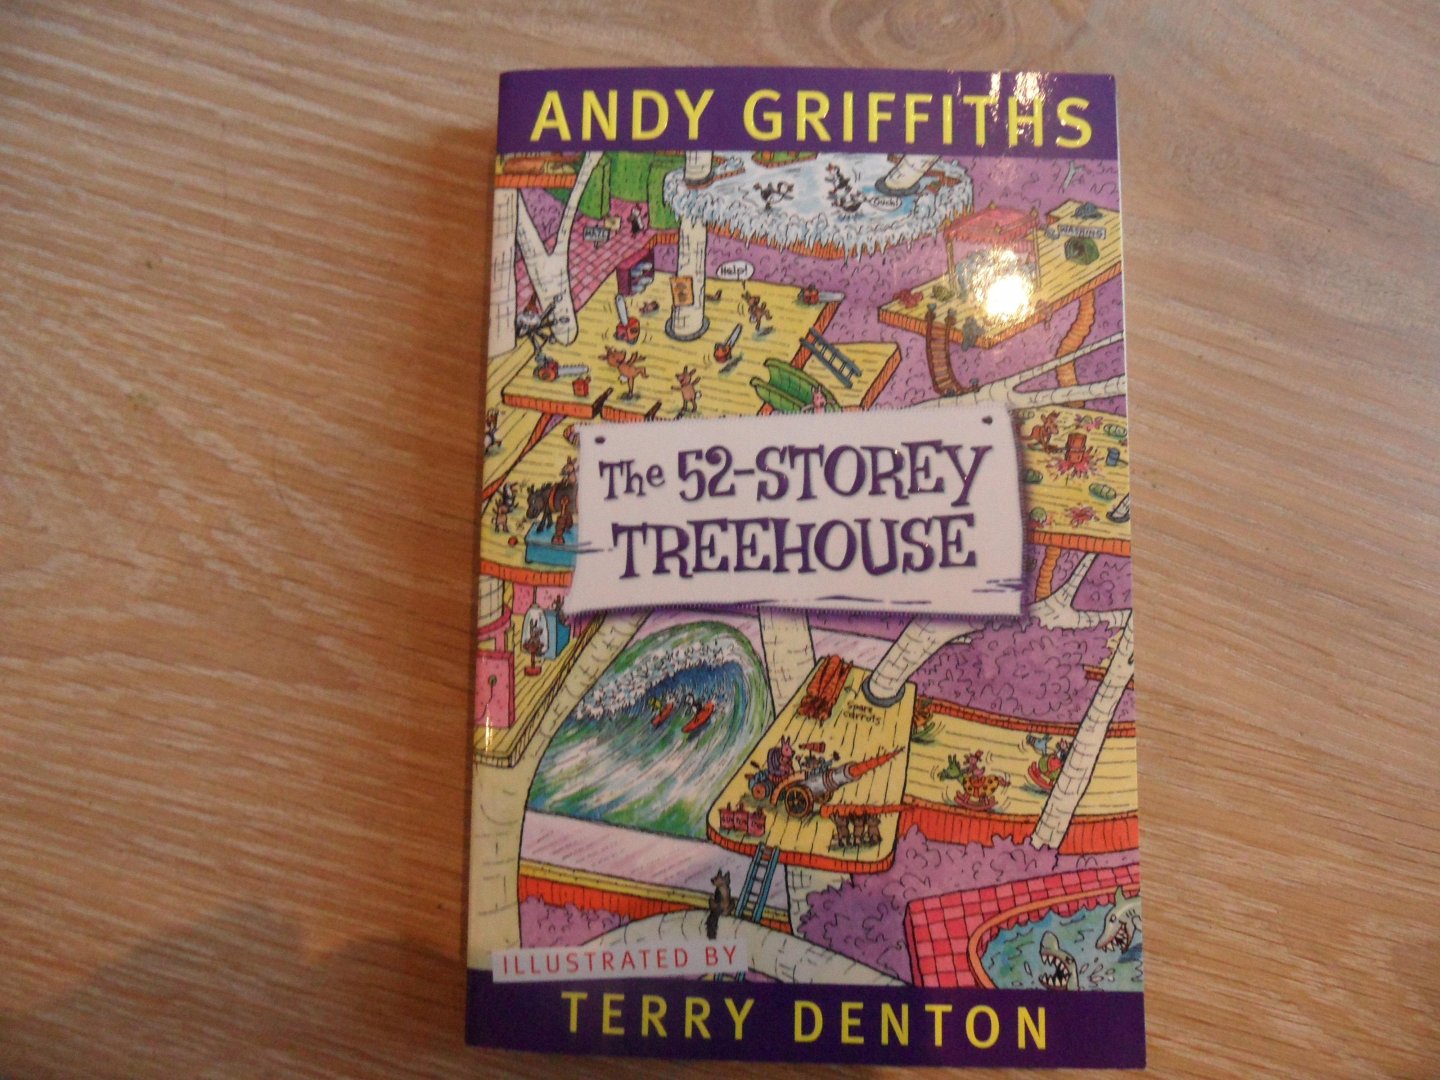 Griffiths, Andy - The 52-storey treehouse